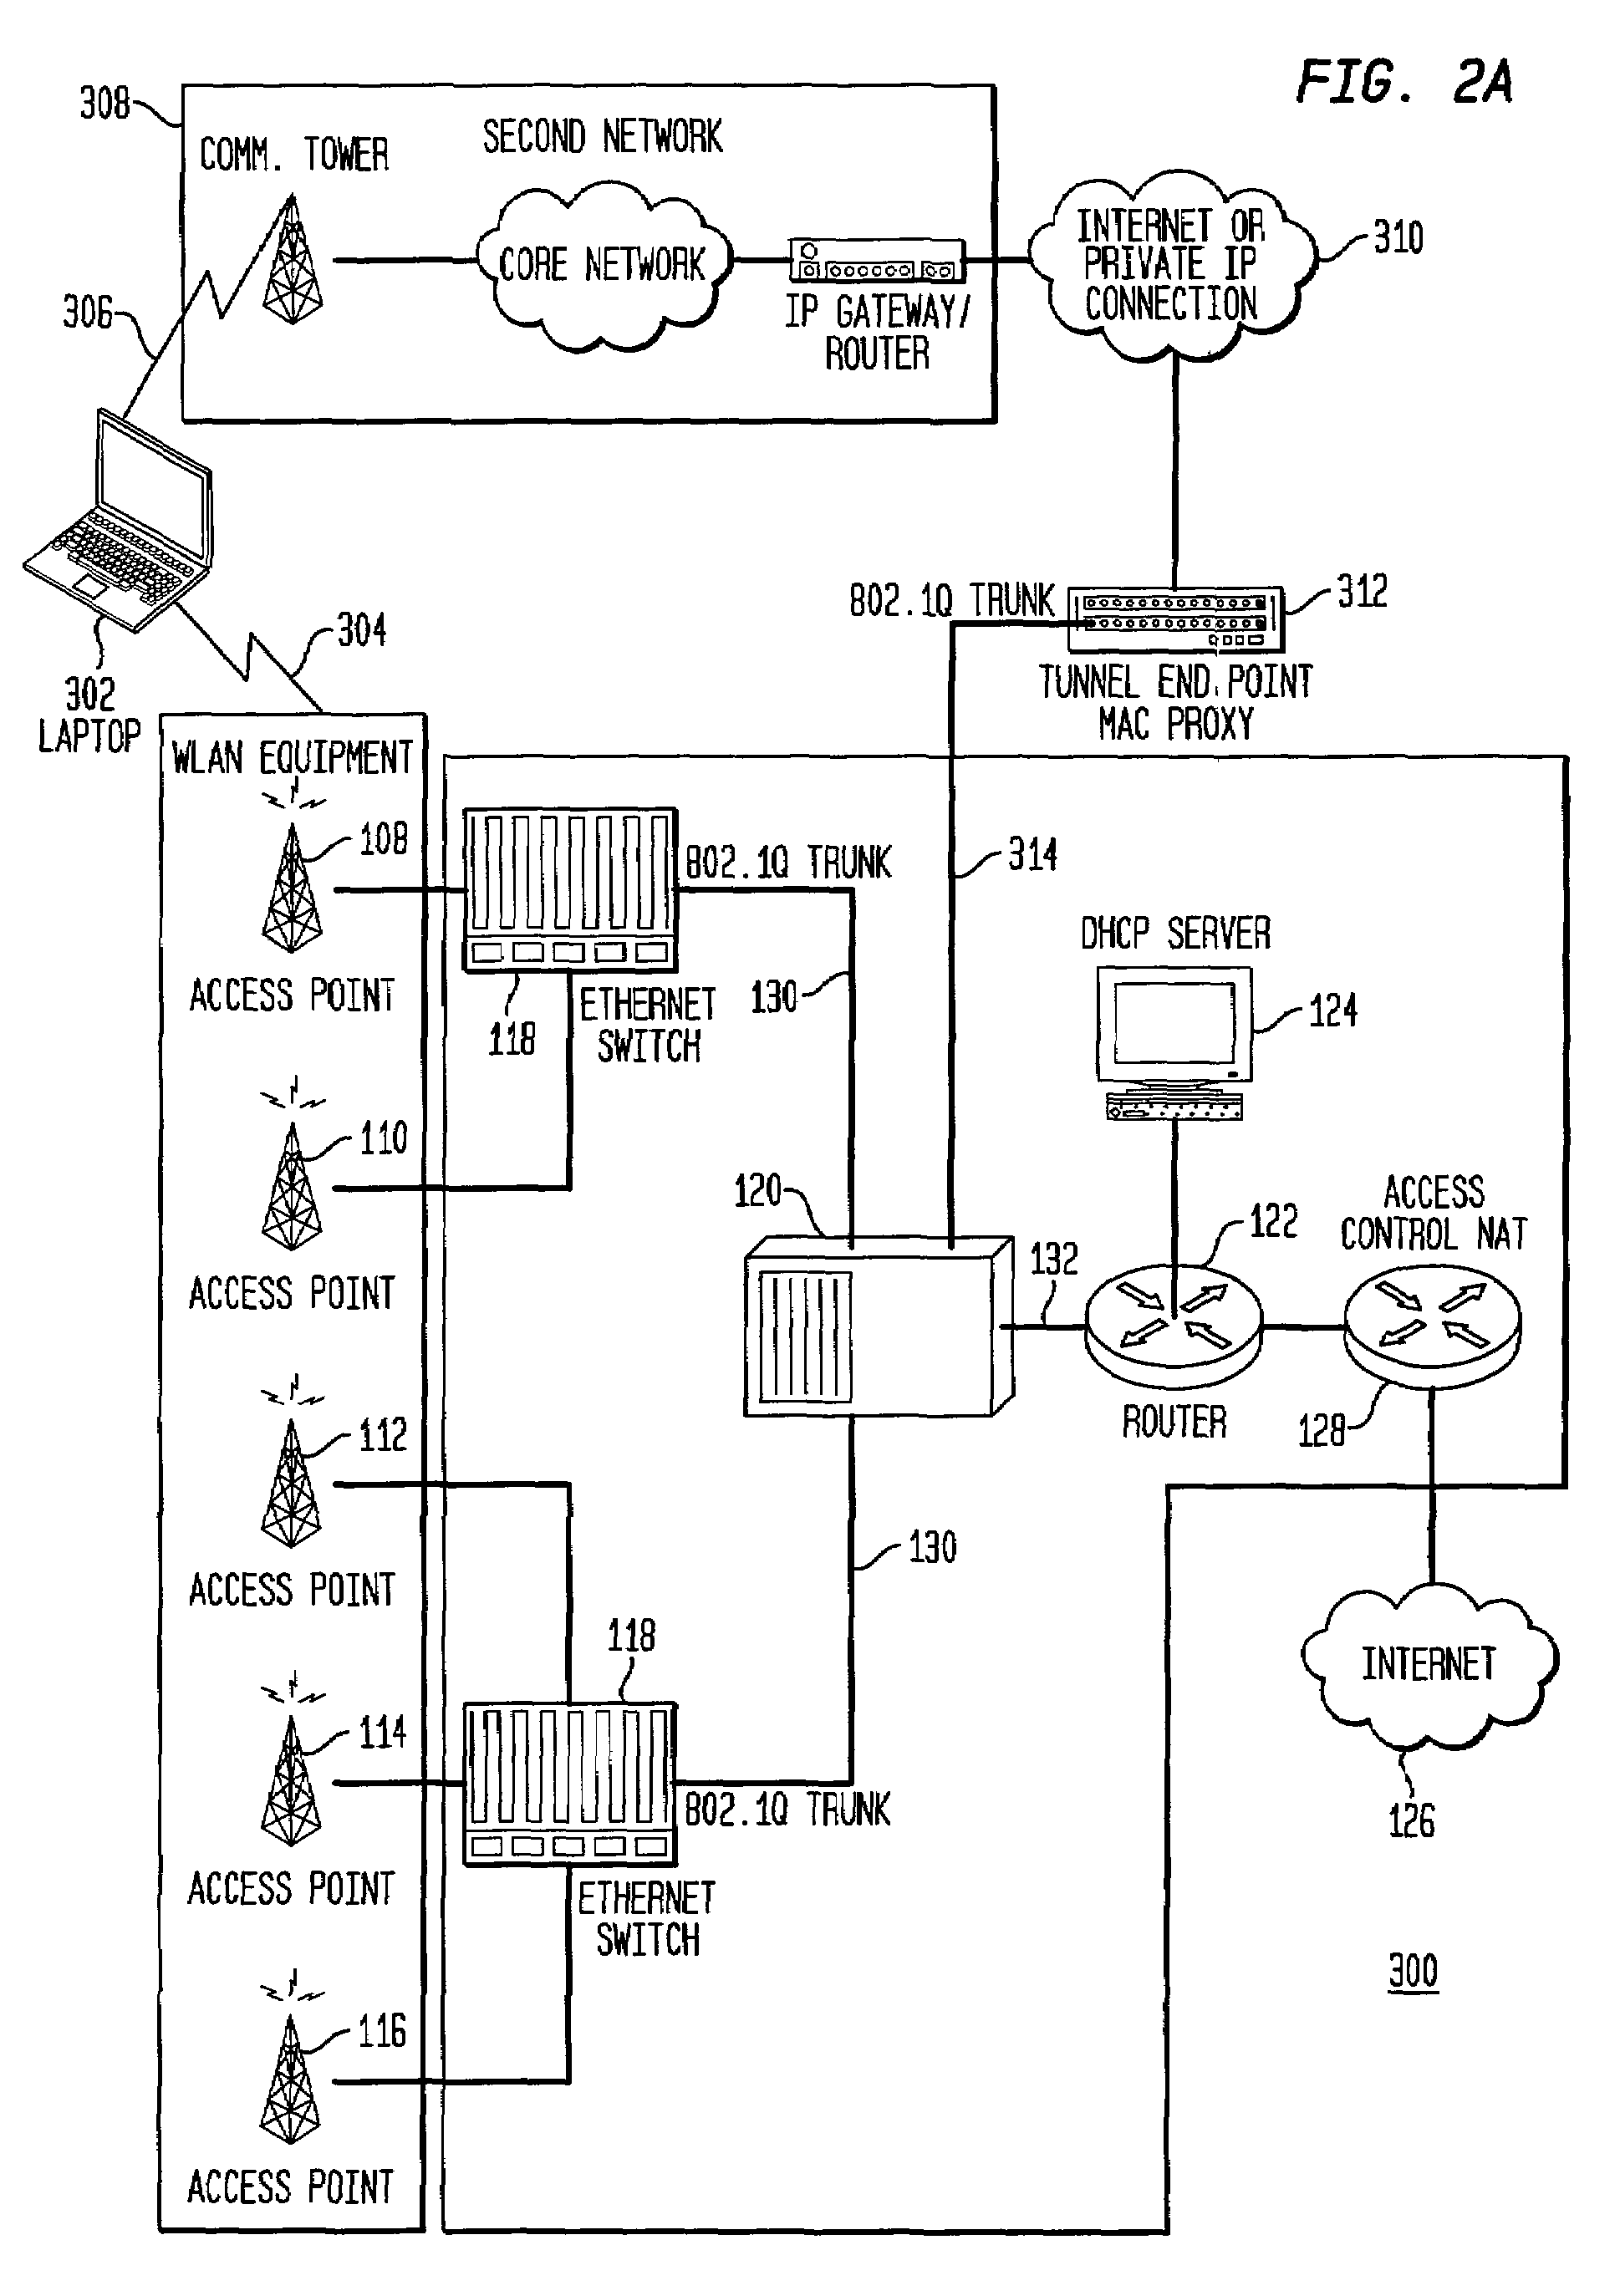 Wireless local area network with clients having extended freedom of movement